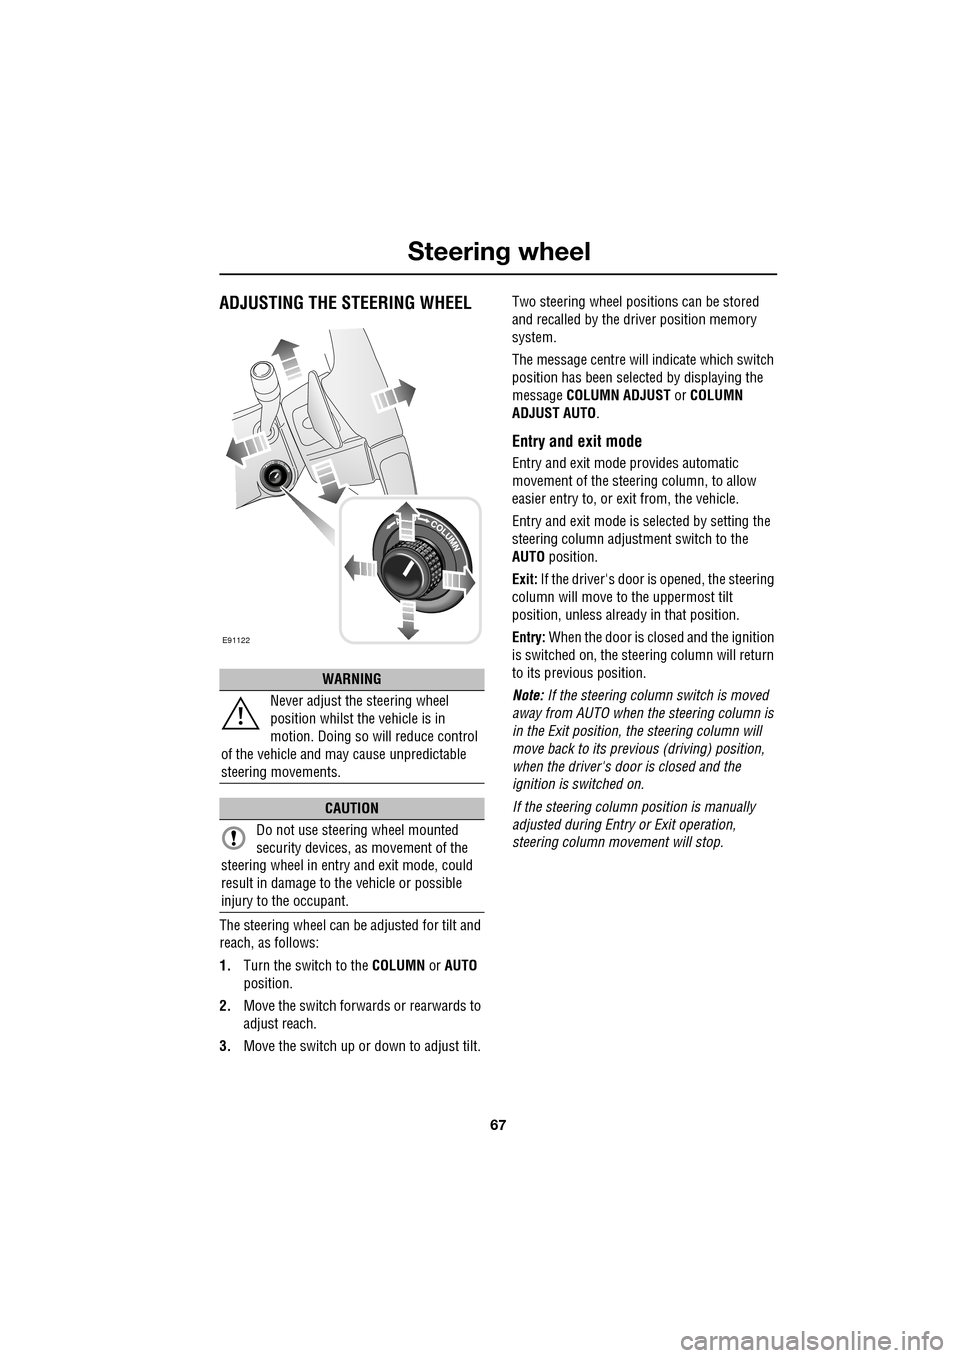 JAGUAR XF 2009 1.G Owners Manual 67
Steering wheel
               
 ADJUSTING THE STEERING WHEEL
The steering wheel can be adjusted for tilt and 
reach, as follows:
1.Turn the switch to the  COLUMN or AUTO 
position.
2. Move the swit